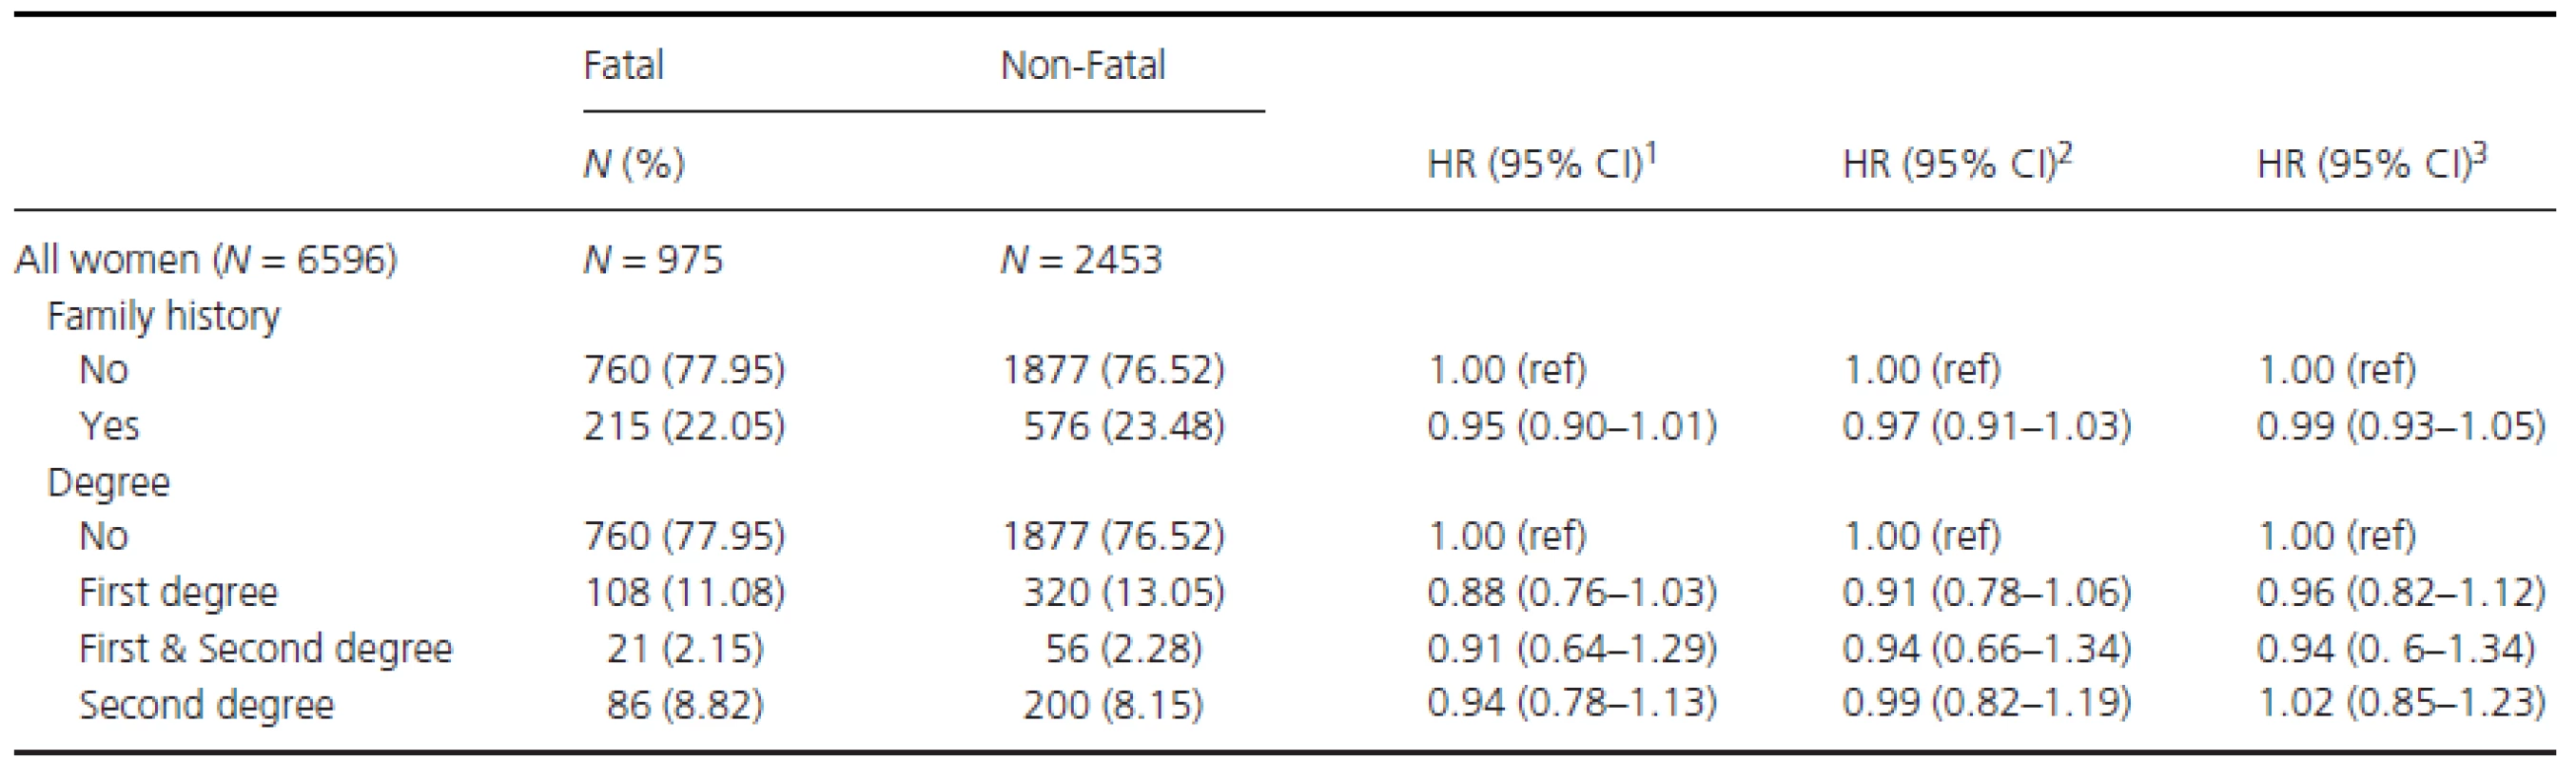 Hazard ratio (HR) and 95% confidence intervals (CI) for fatal BC (breast cancer) by family history of breast cancer, in women with sufficient data to allow classification by severity.